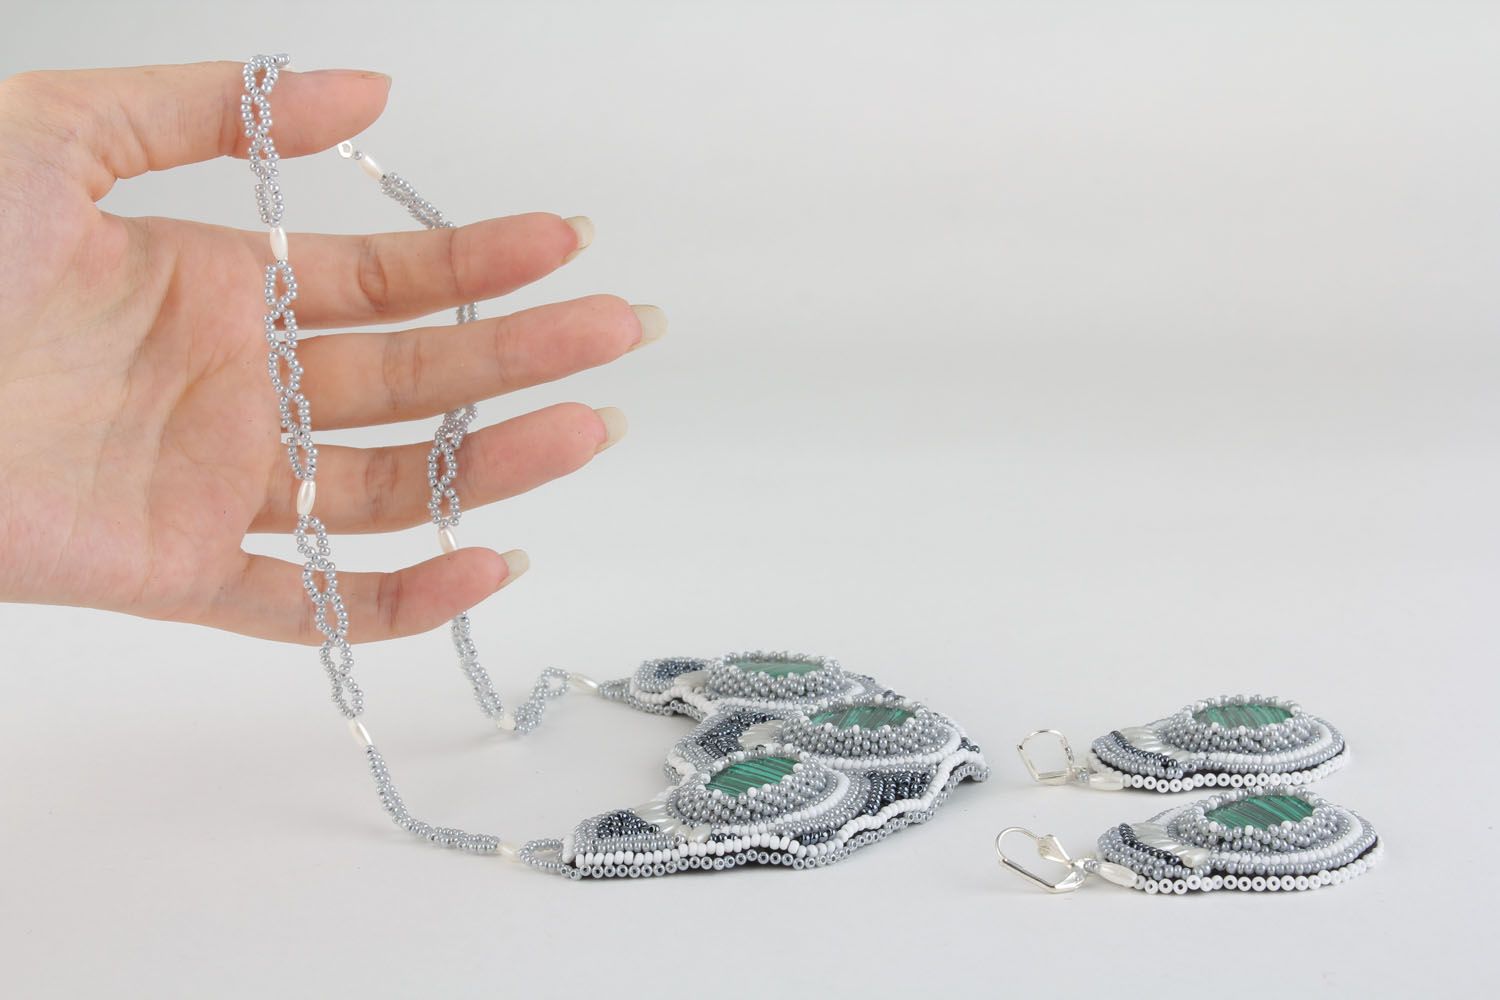 Necklace and earrings set made using soutache technique photo 4